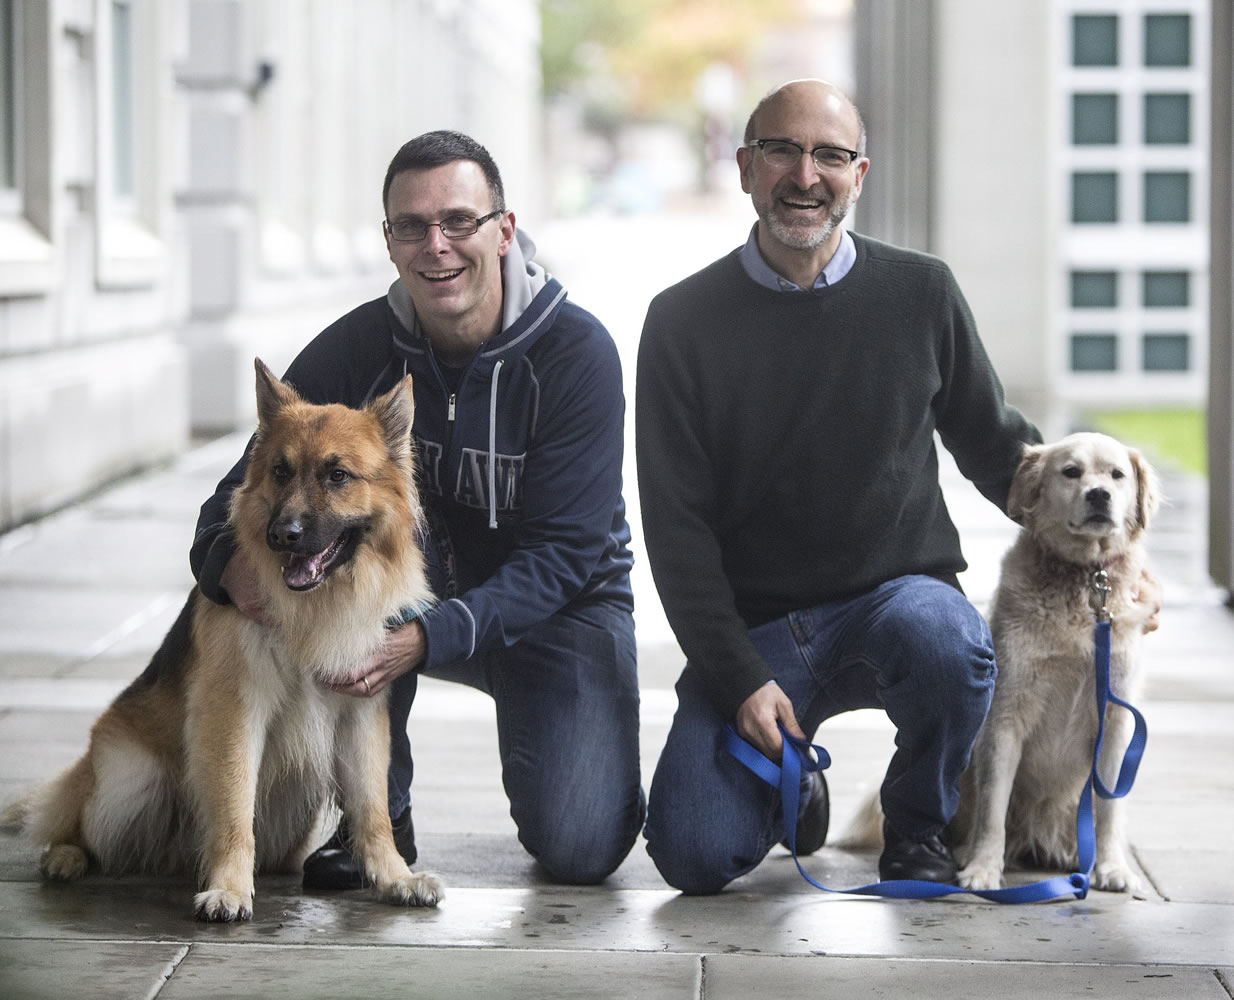 University of Washington scientists Matt Kaeberlein, with his dog Dobby, left, and Dan Promislow, with his dog Frisbee, hope to launch a study of the anti-aging drug rapamycin in pet dogs.